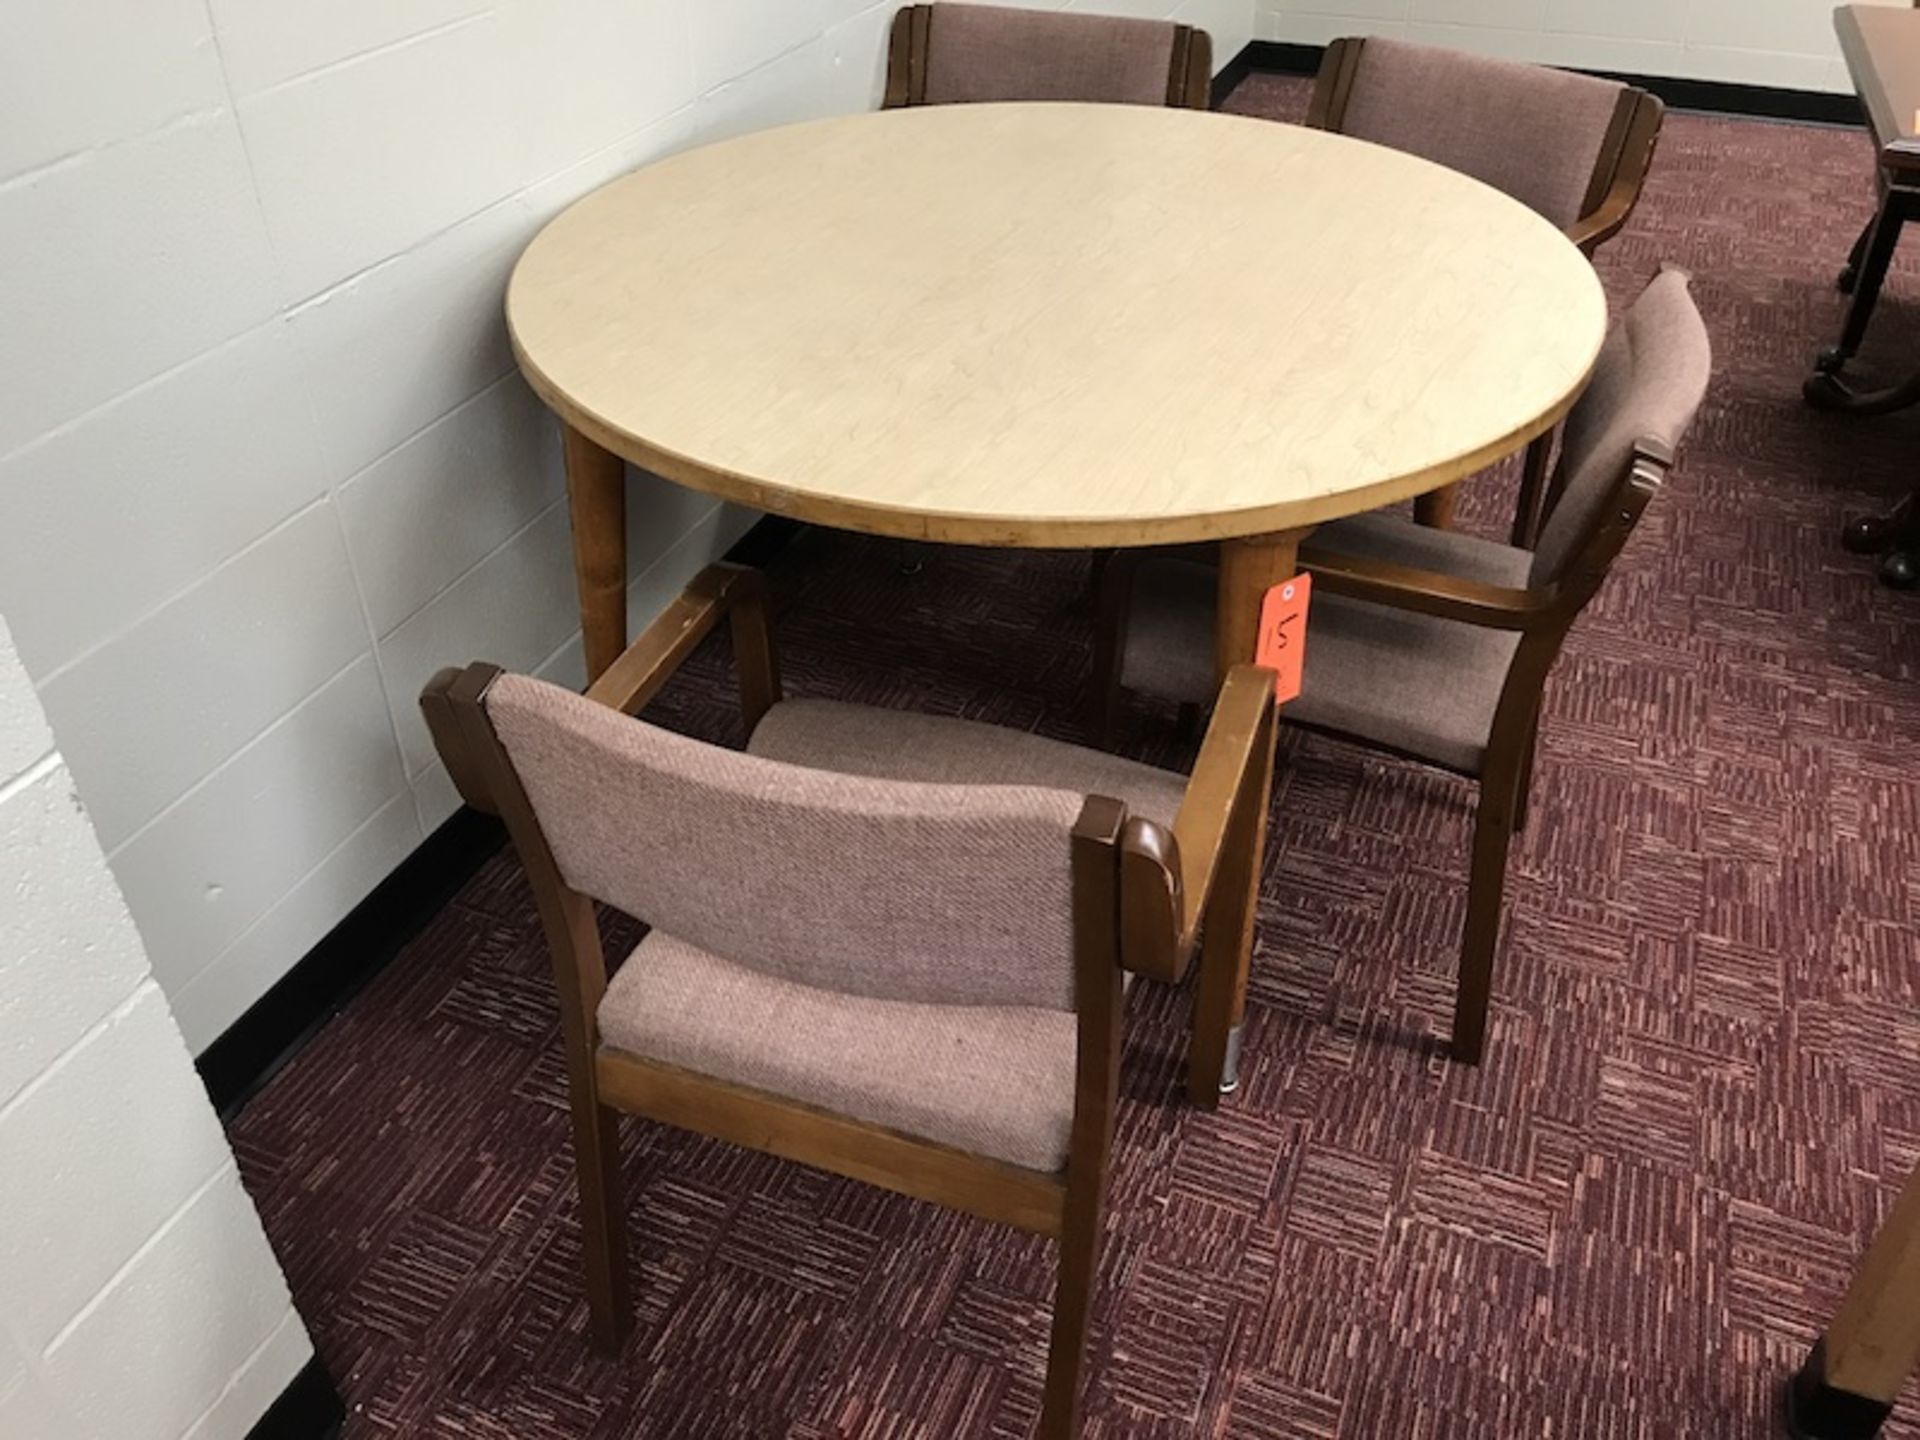 Lot - (2) 48 in. Diameter Wood Tables (8) Chairs (Room 310) - Image 2 of 2